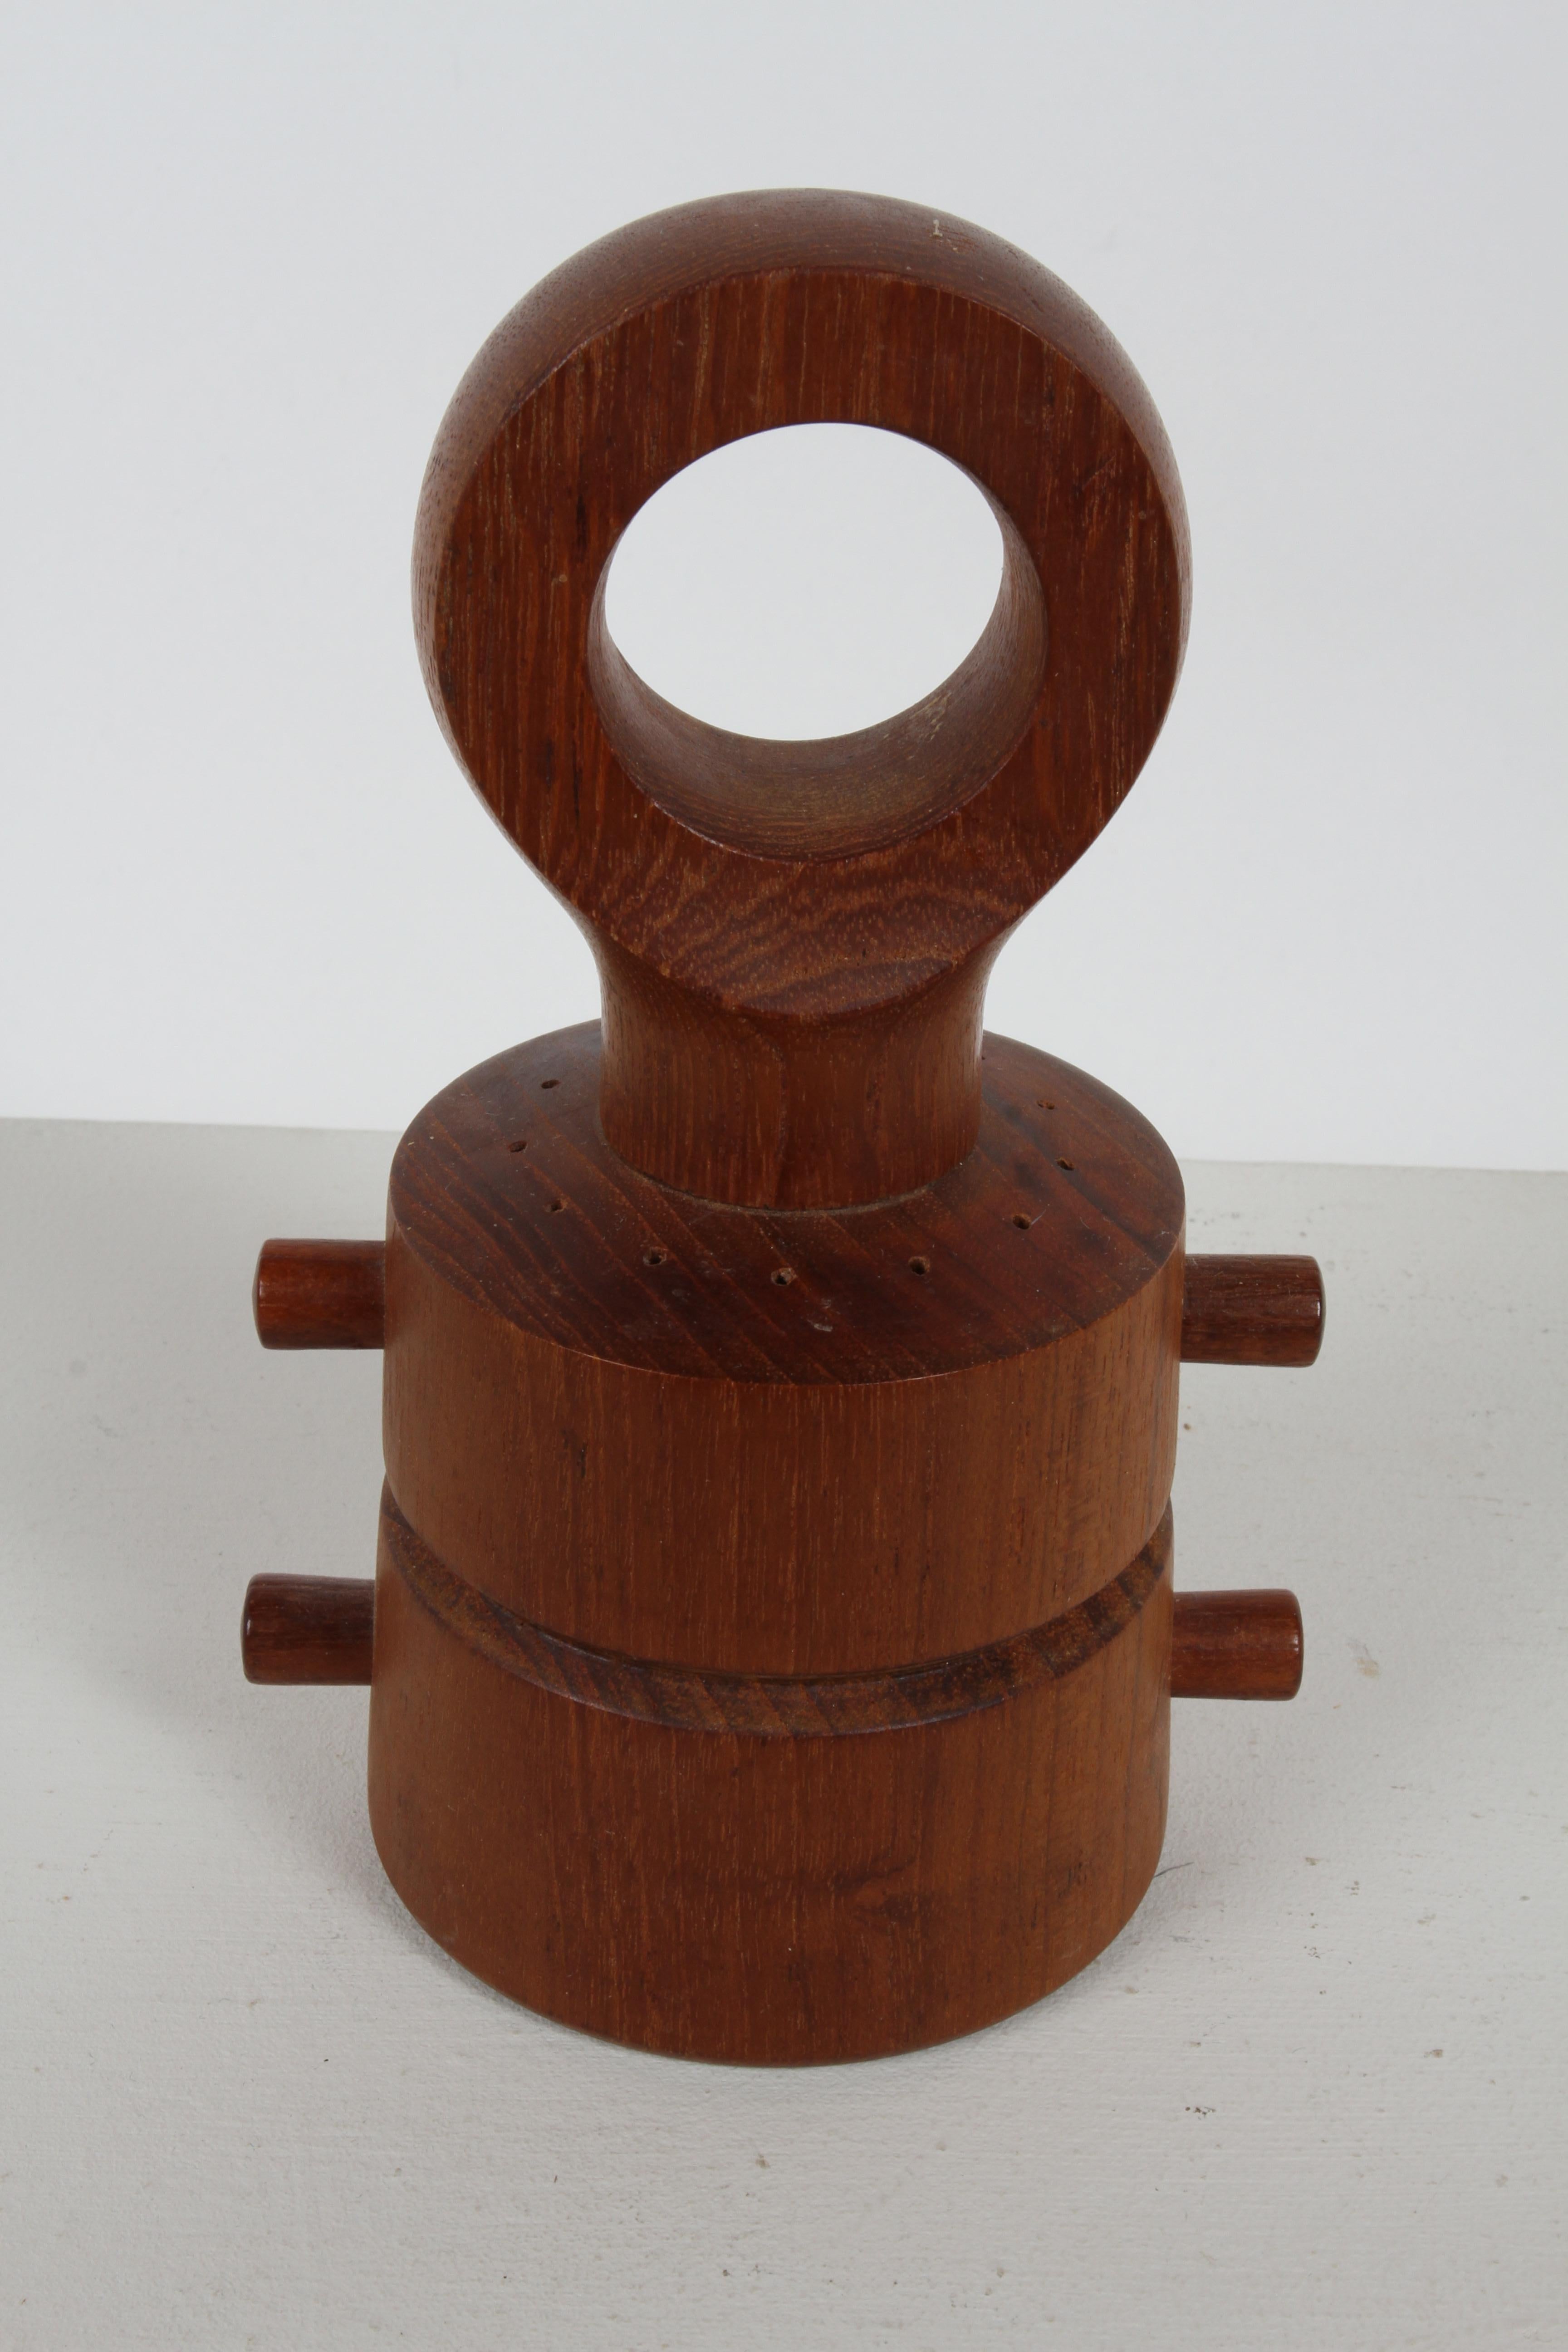 A 1960s Danish Modern Jens Quistgaard Salt & peppermill made of teak, with open ring handle and two cylinder compartments. Stamped Dansk Designs Ltd Denmark JHQ. Nice original condition. 

Ground pepper comes out of the bottom when top turns and